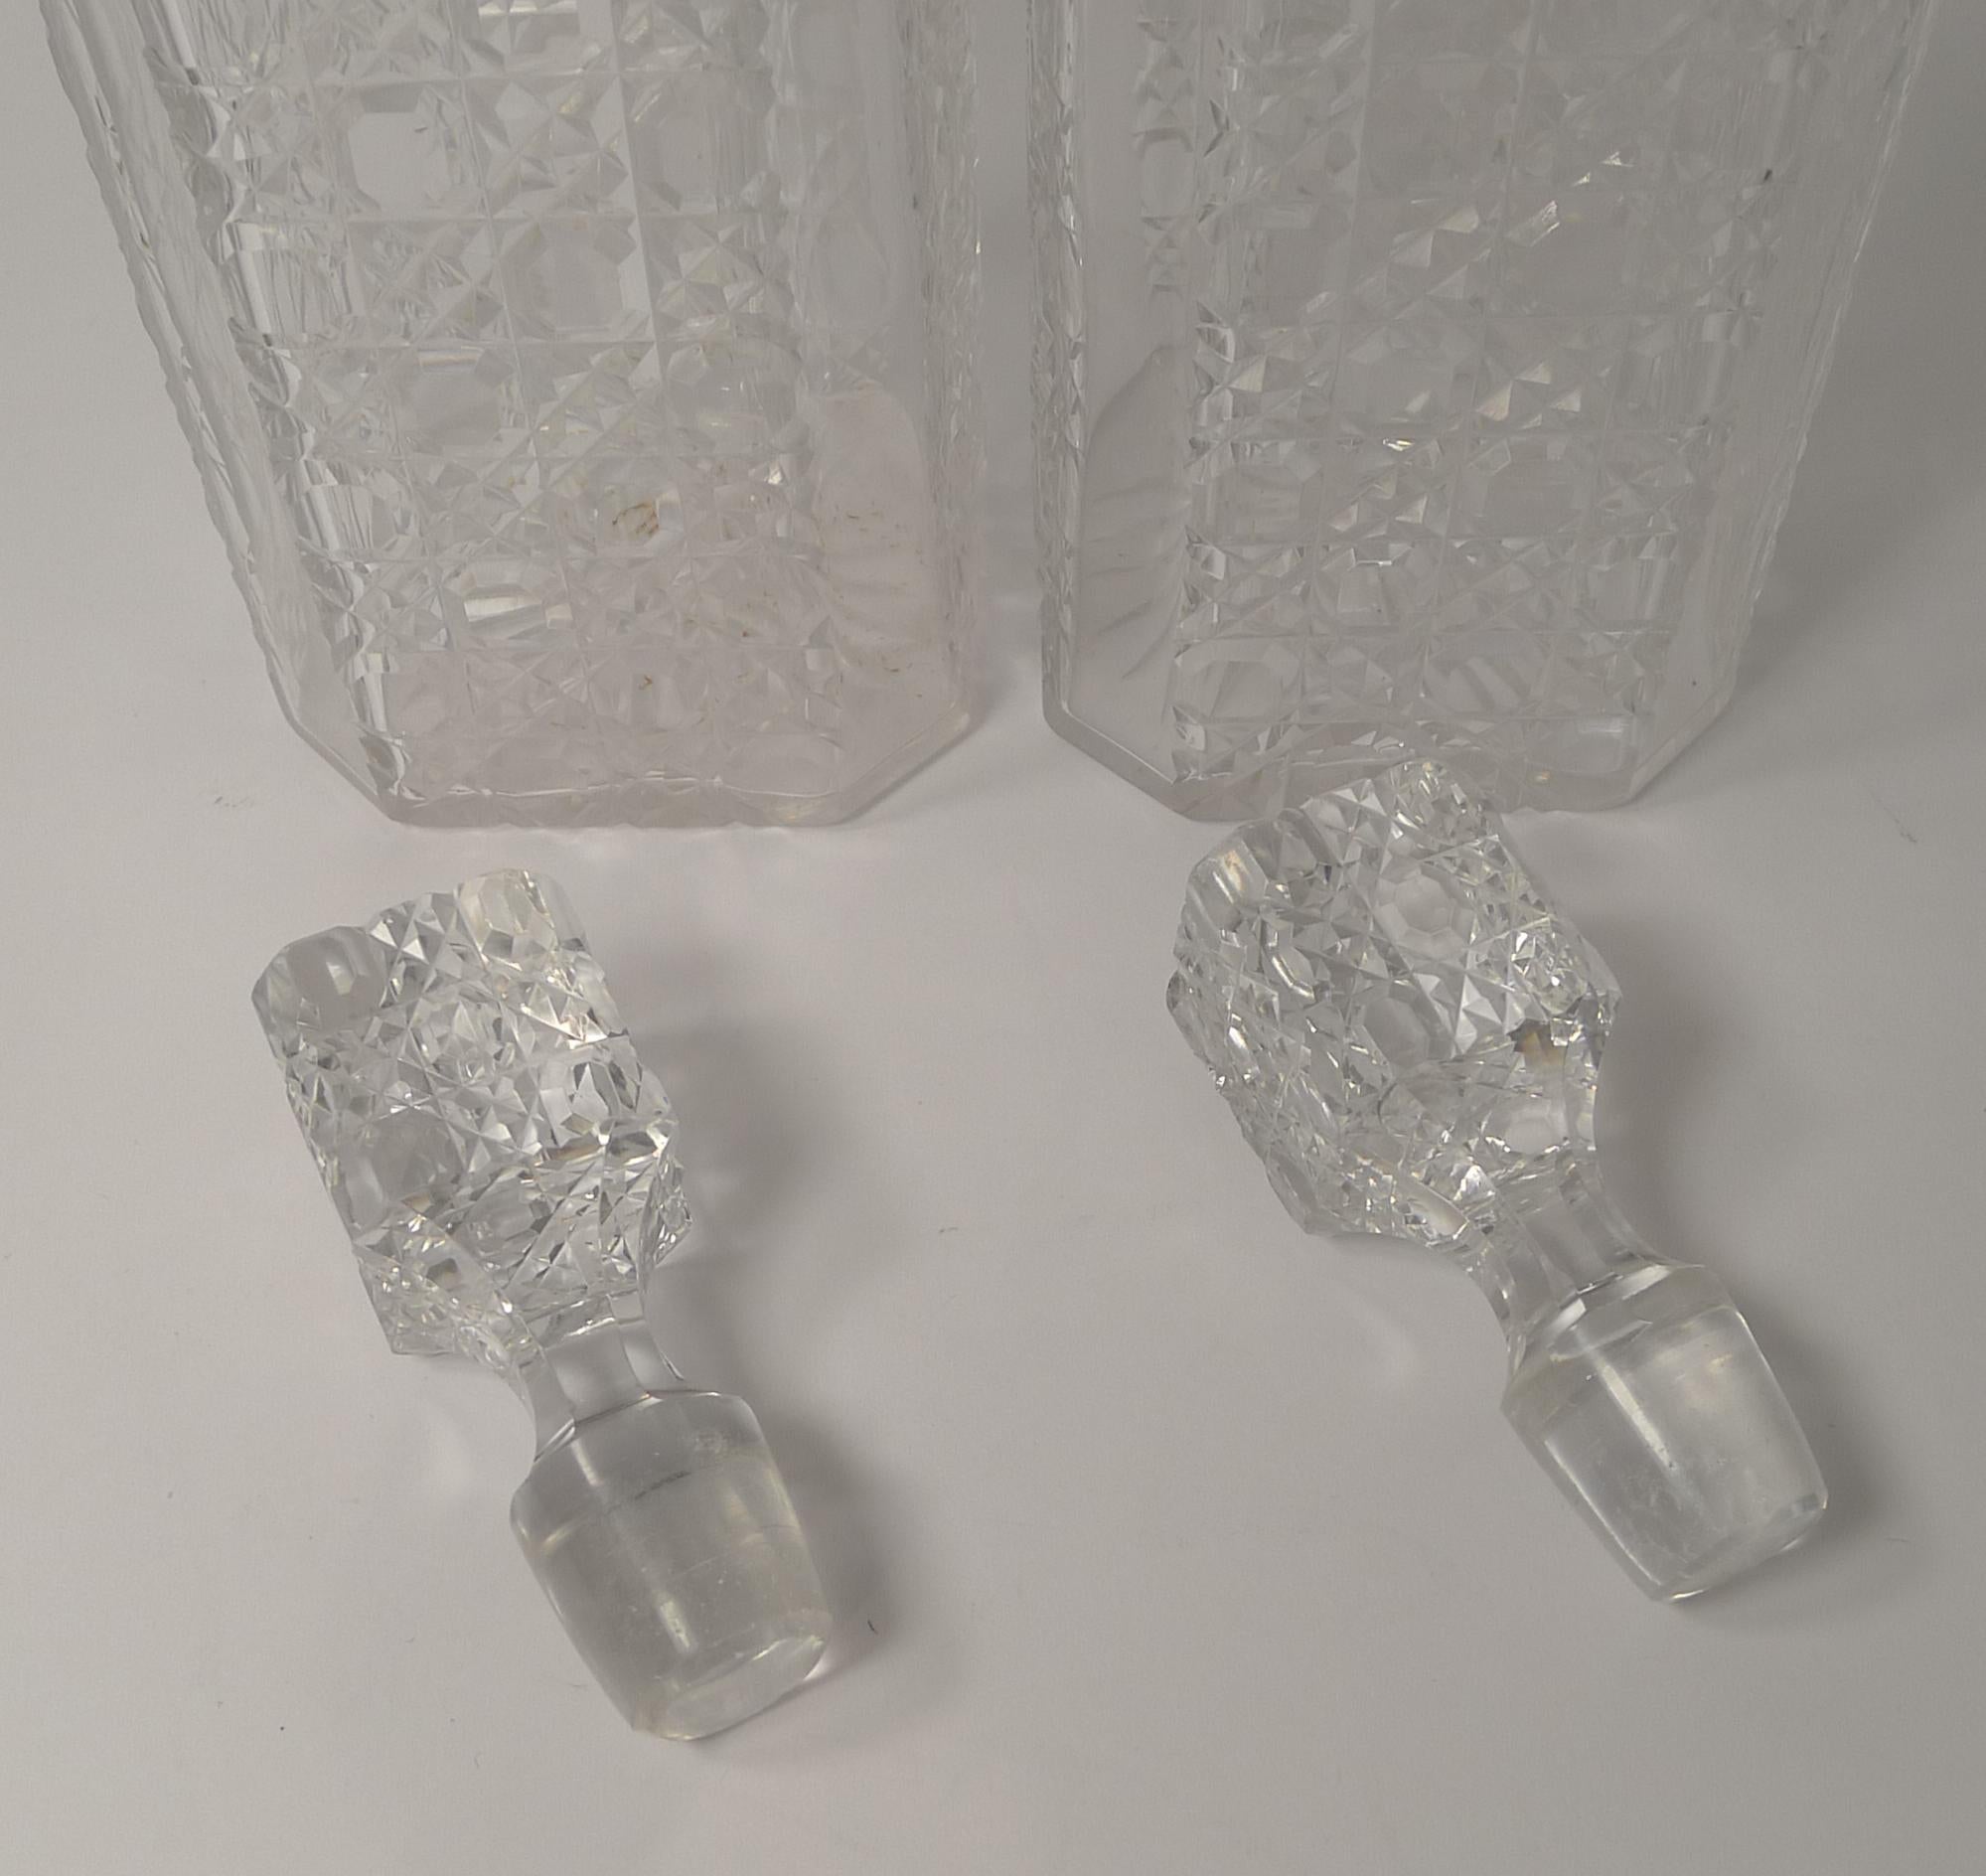 Pair of English Art Deco Cut Crystal Decanters 2